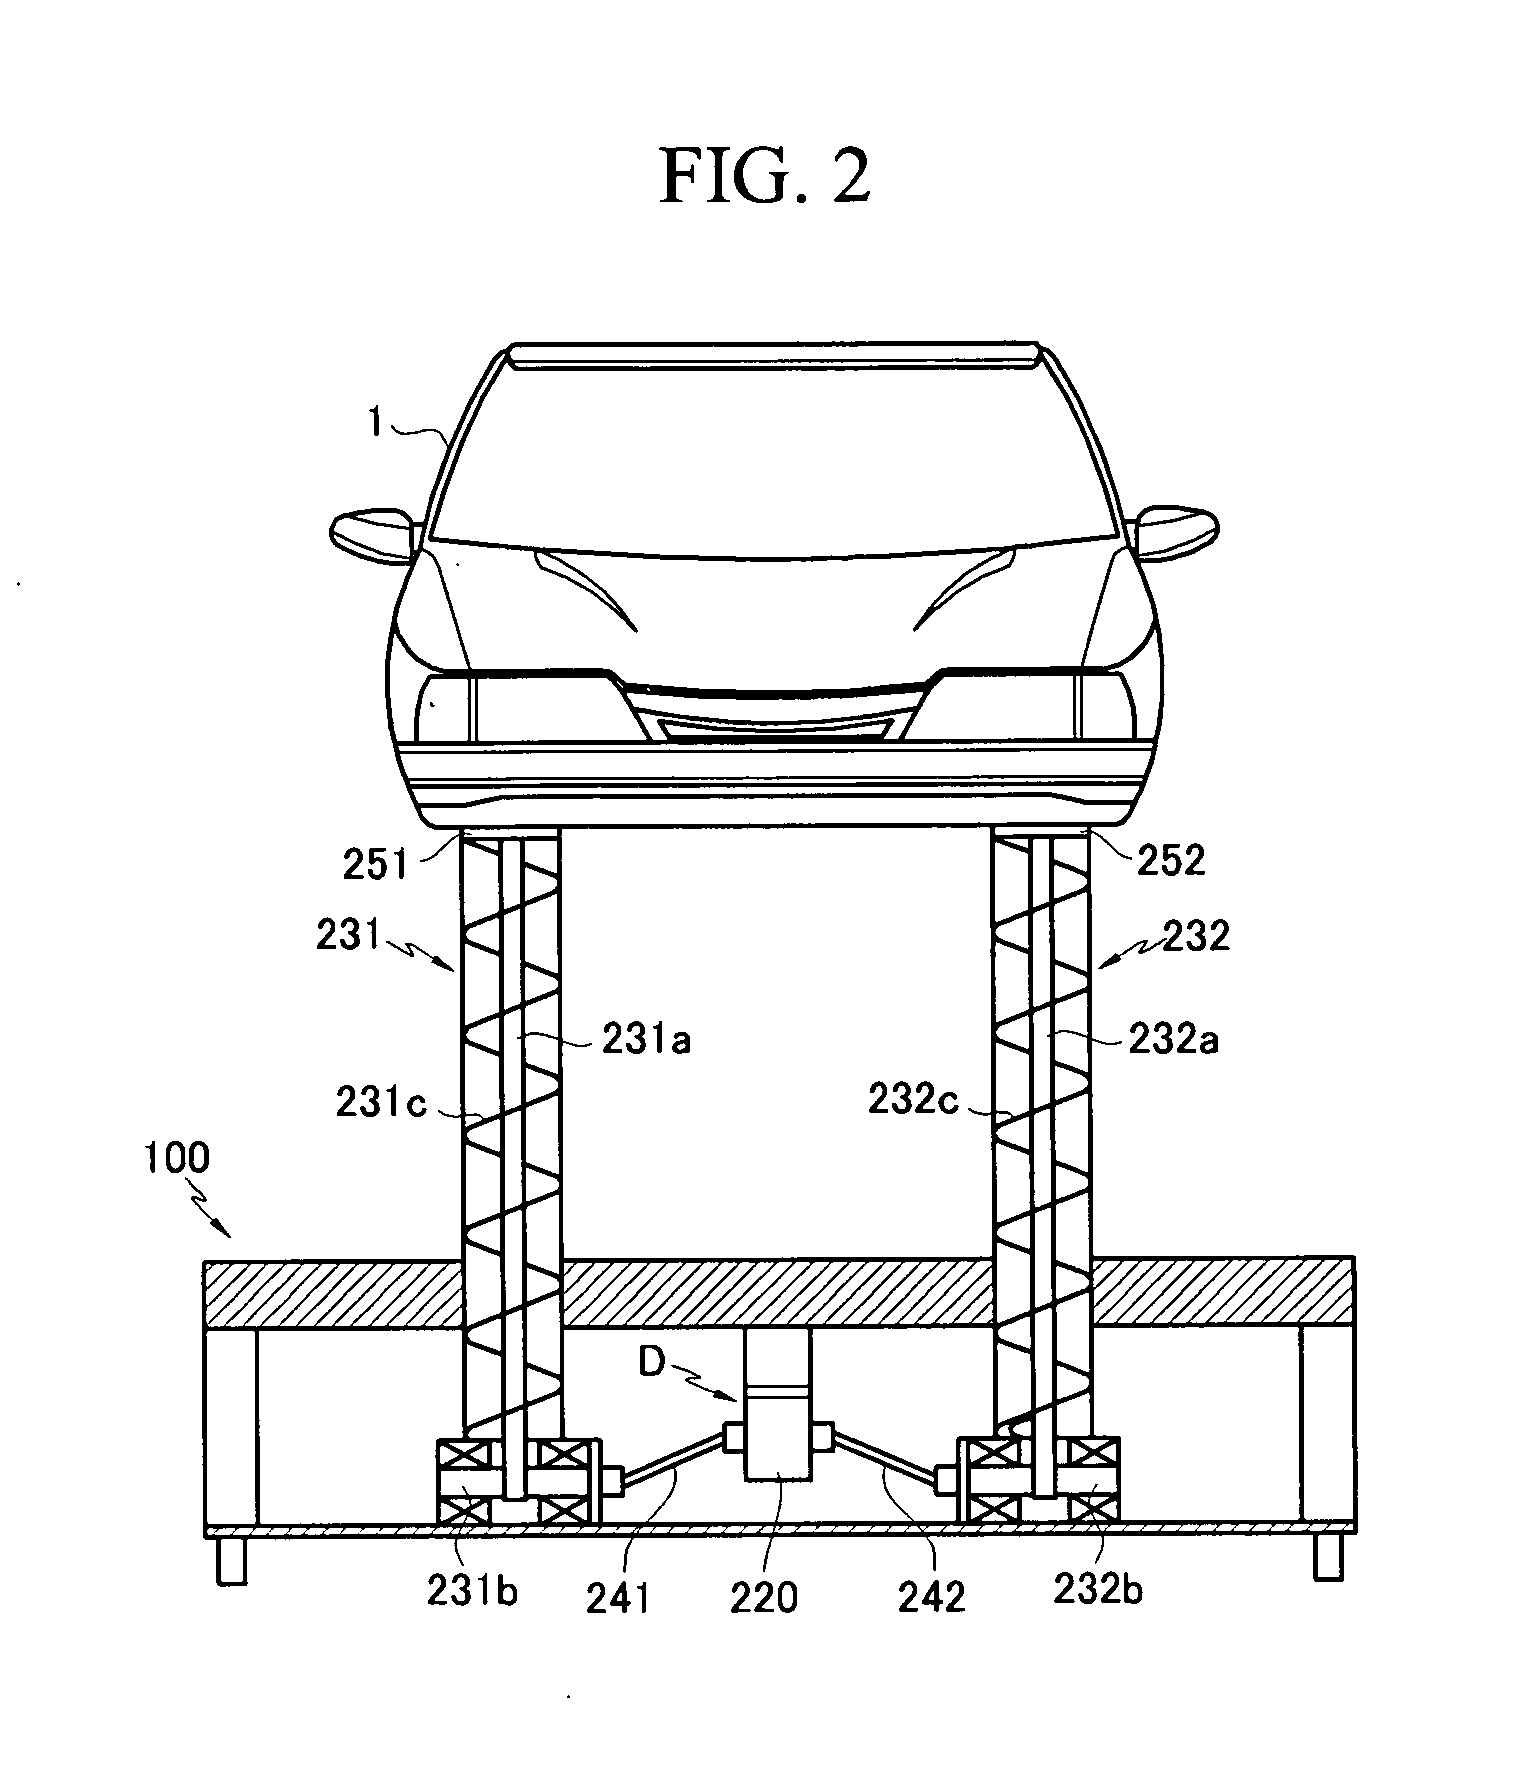 System for transferring vehicle body in vehicle assembling system